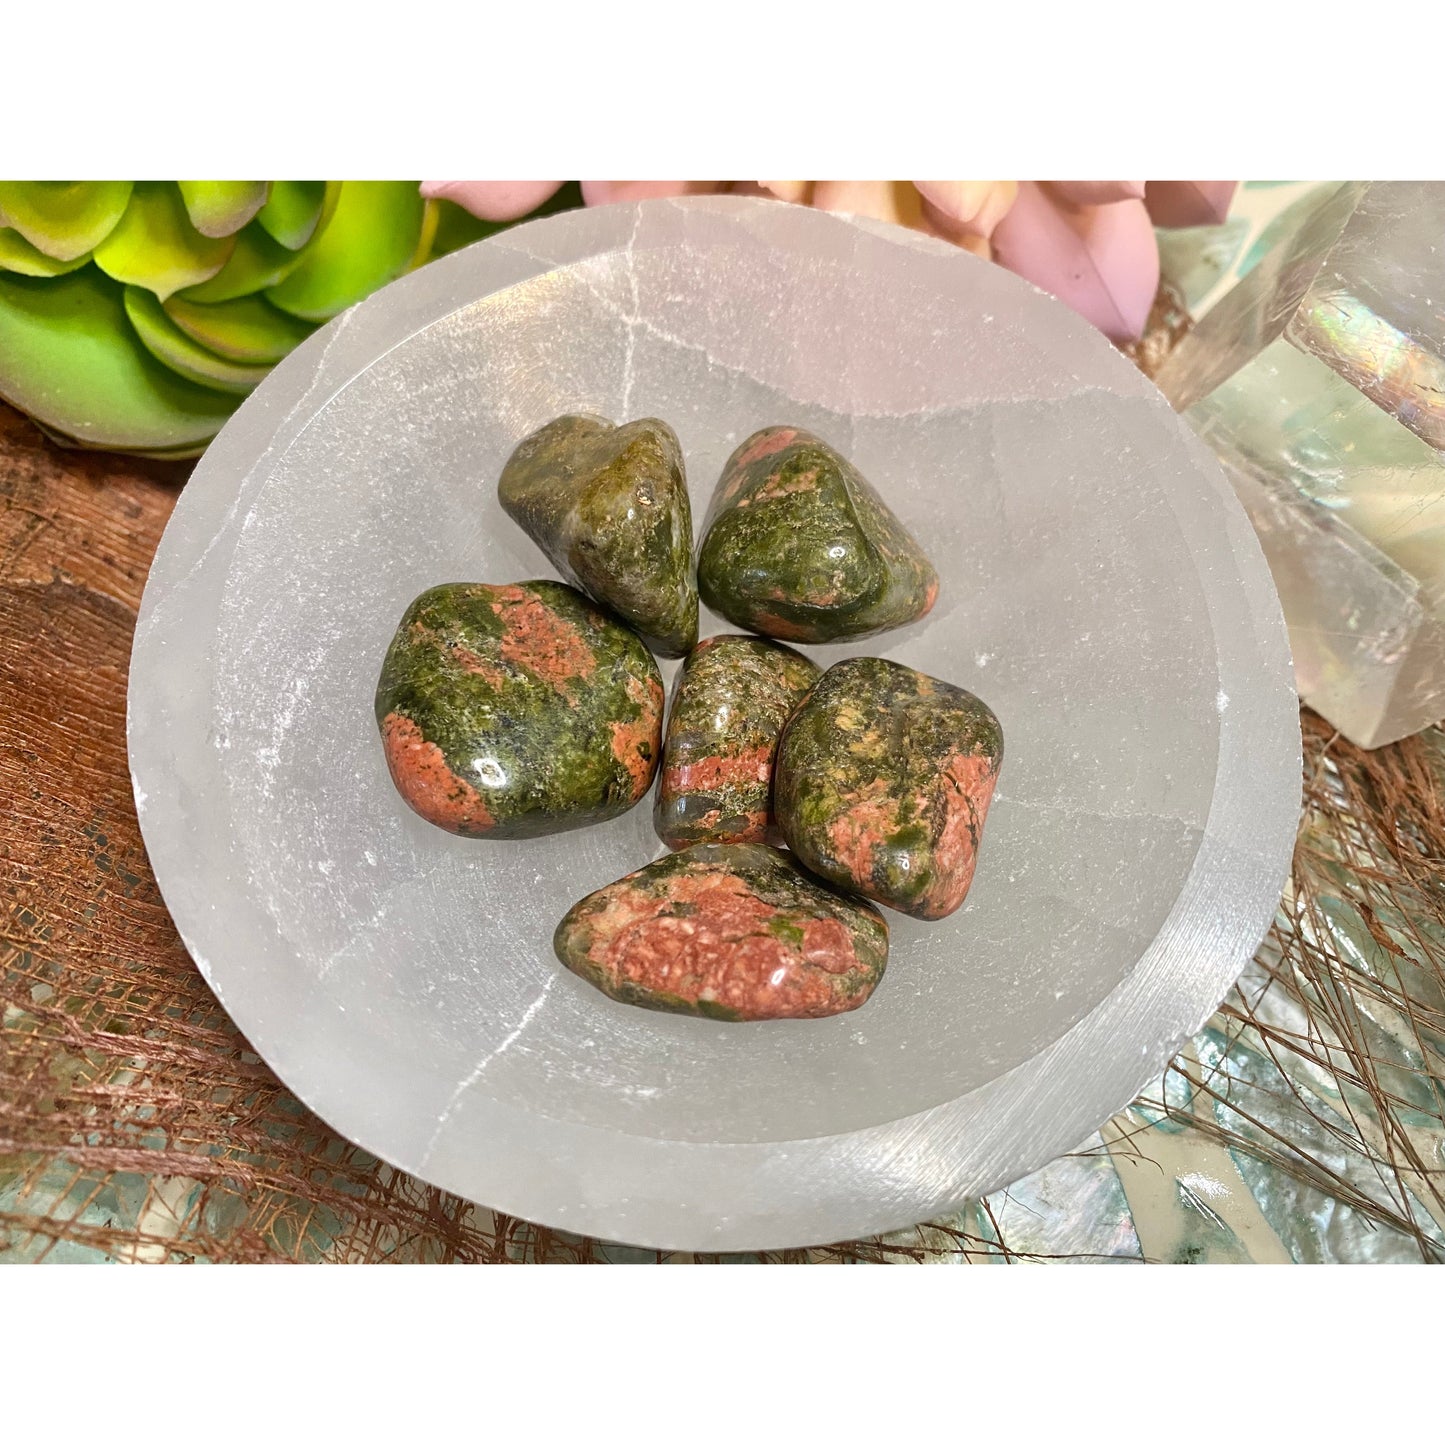 Unakite tumbled stone to clarify your vision!